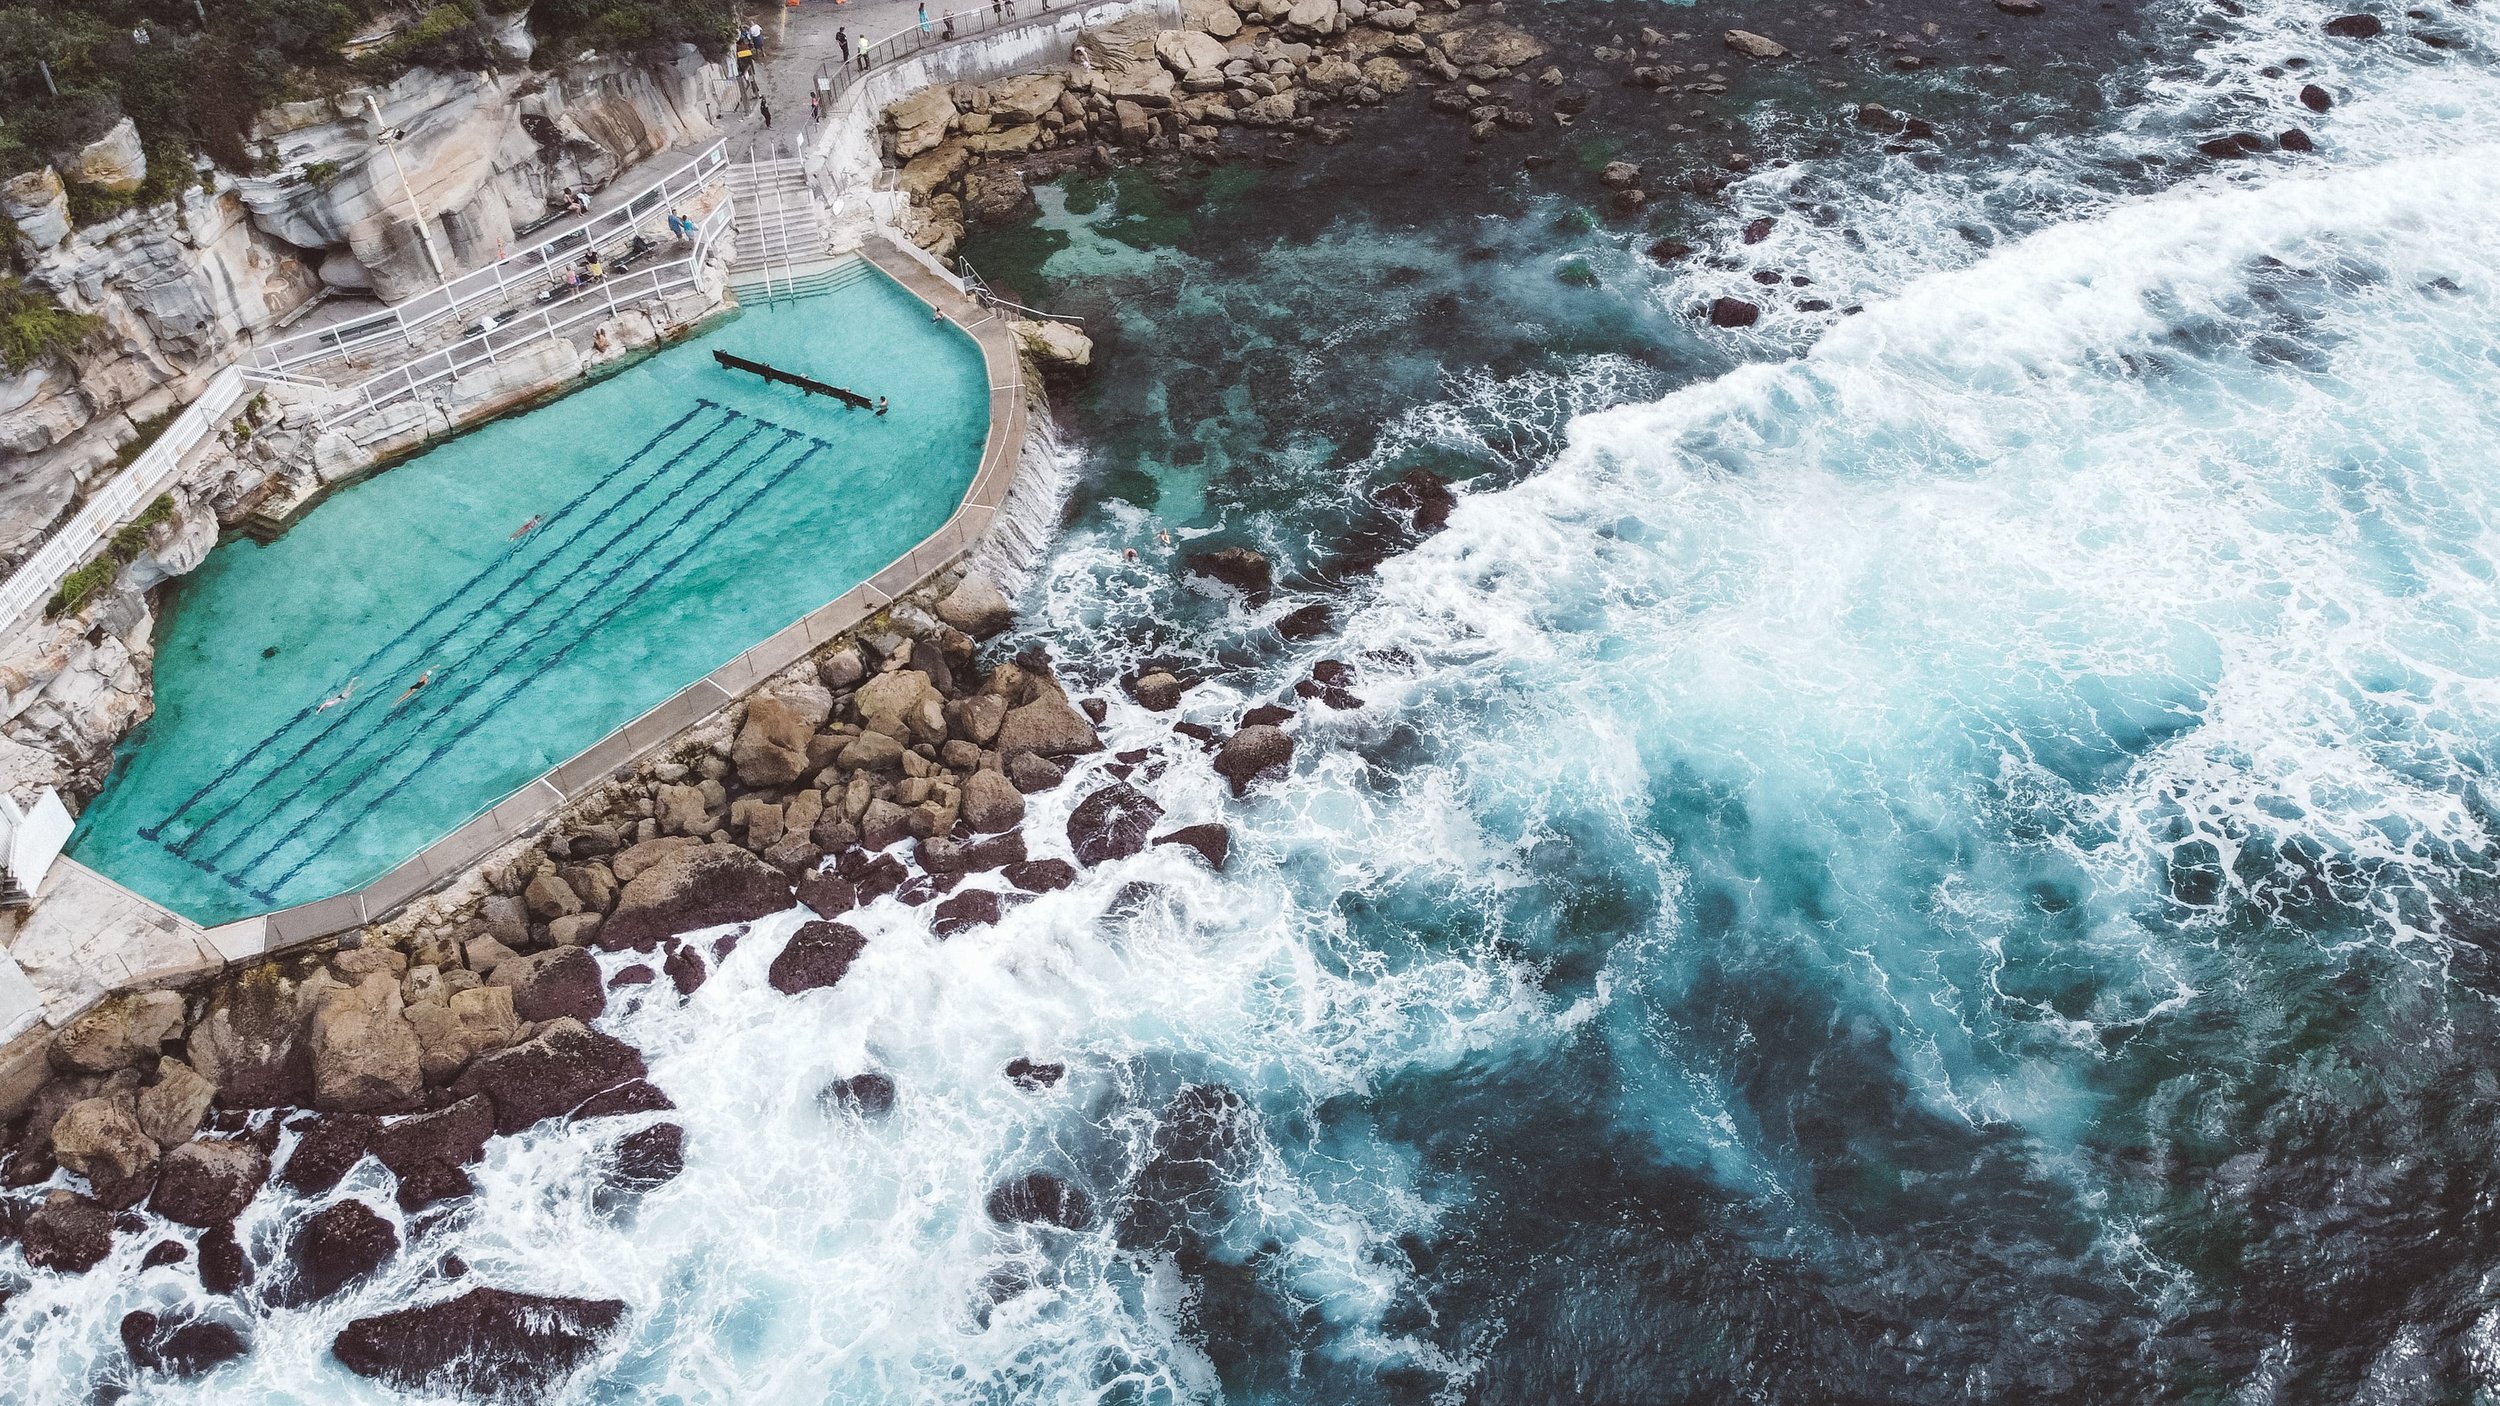 Bronte Baths seen from a drone on a cloudy day - Sydney - New South Wales (NSW) - Australia